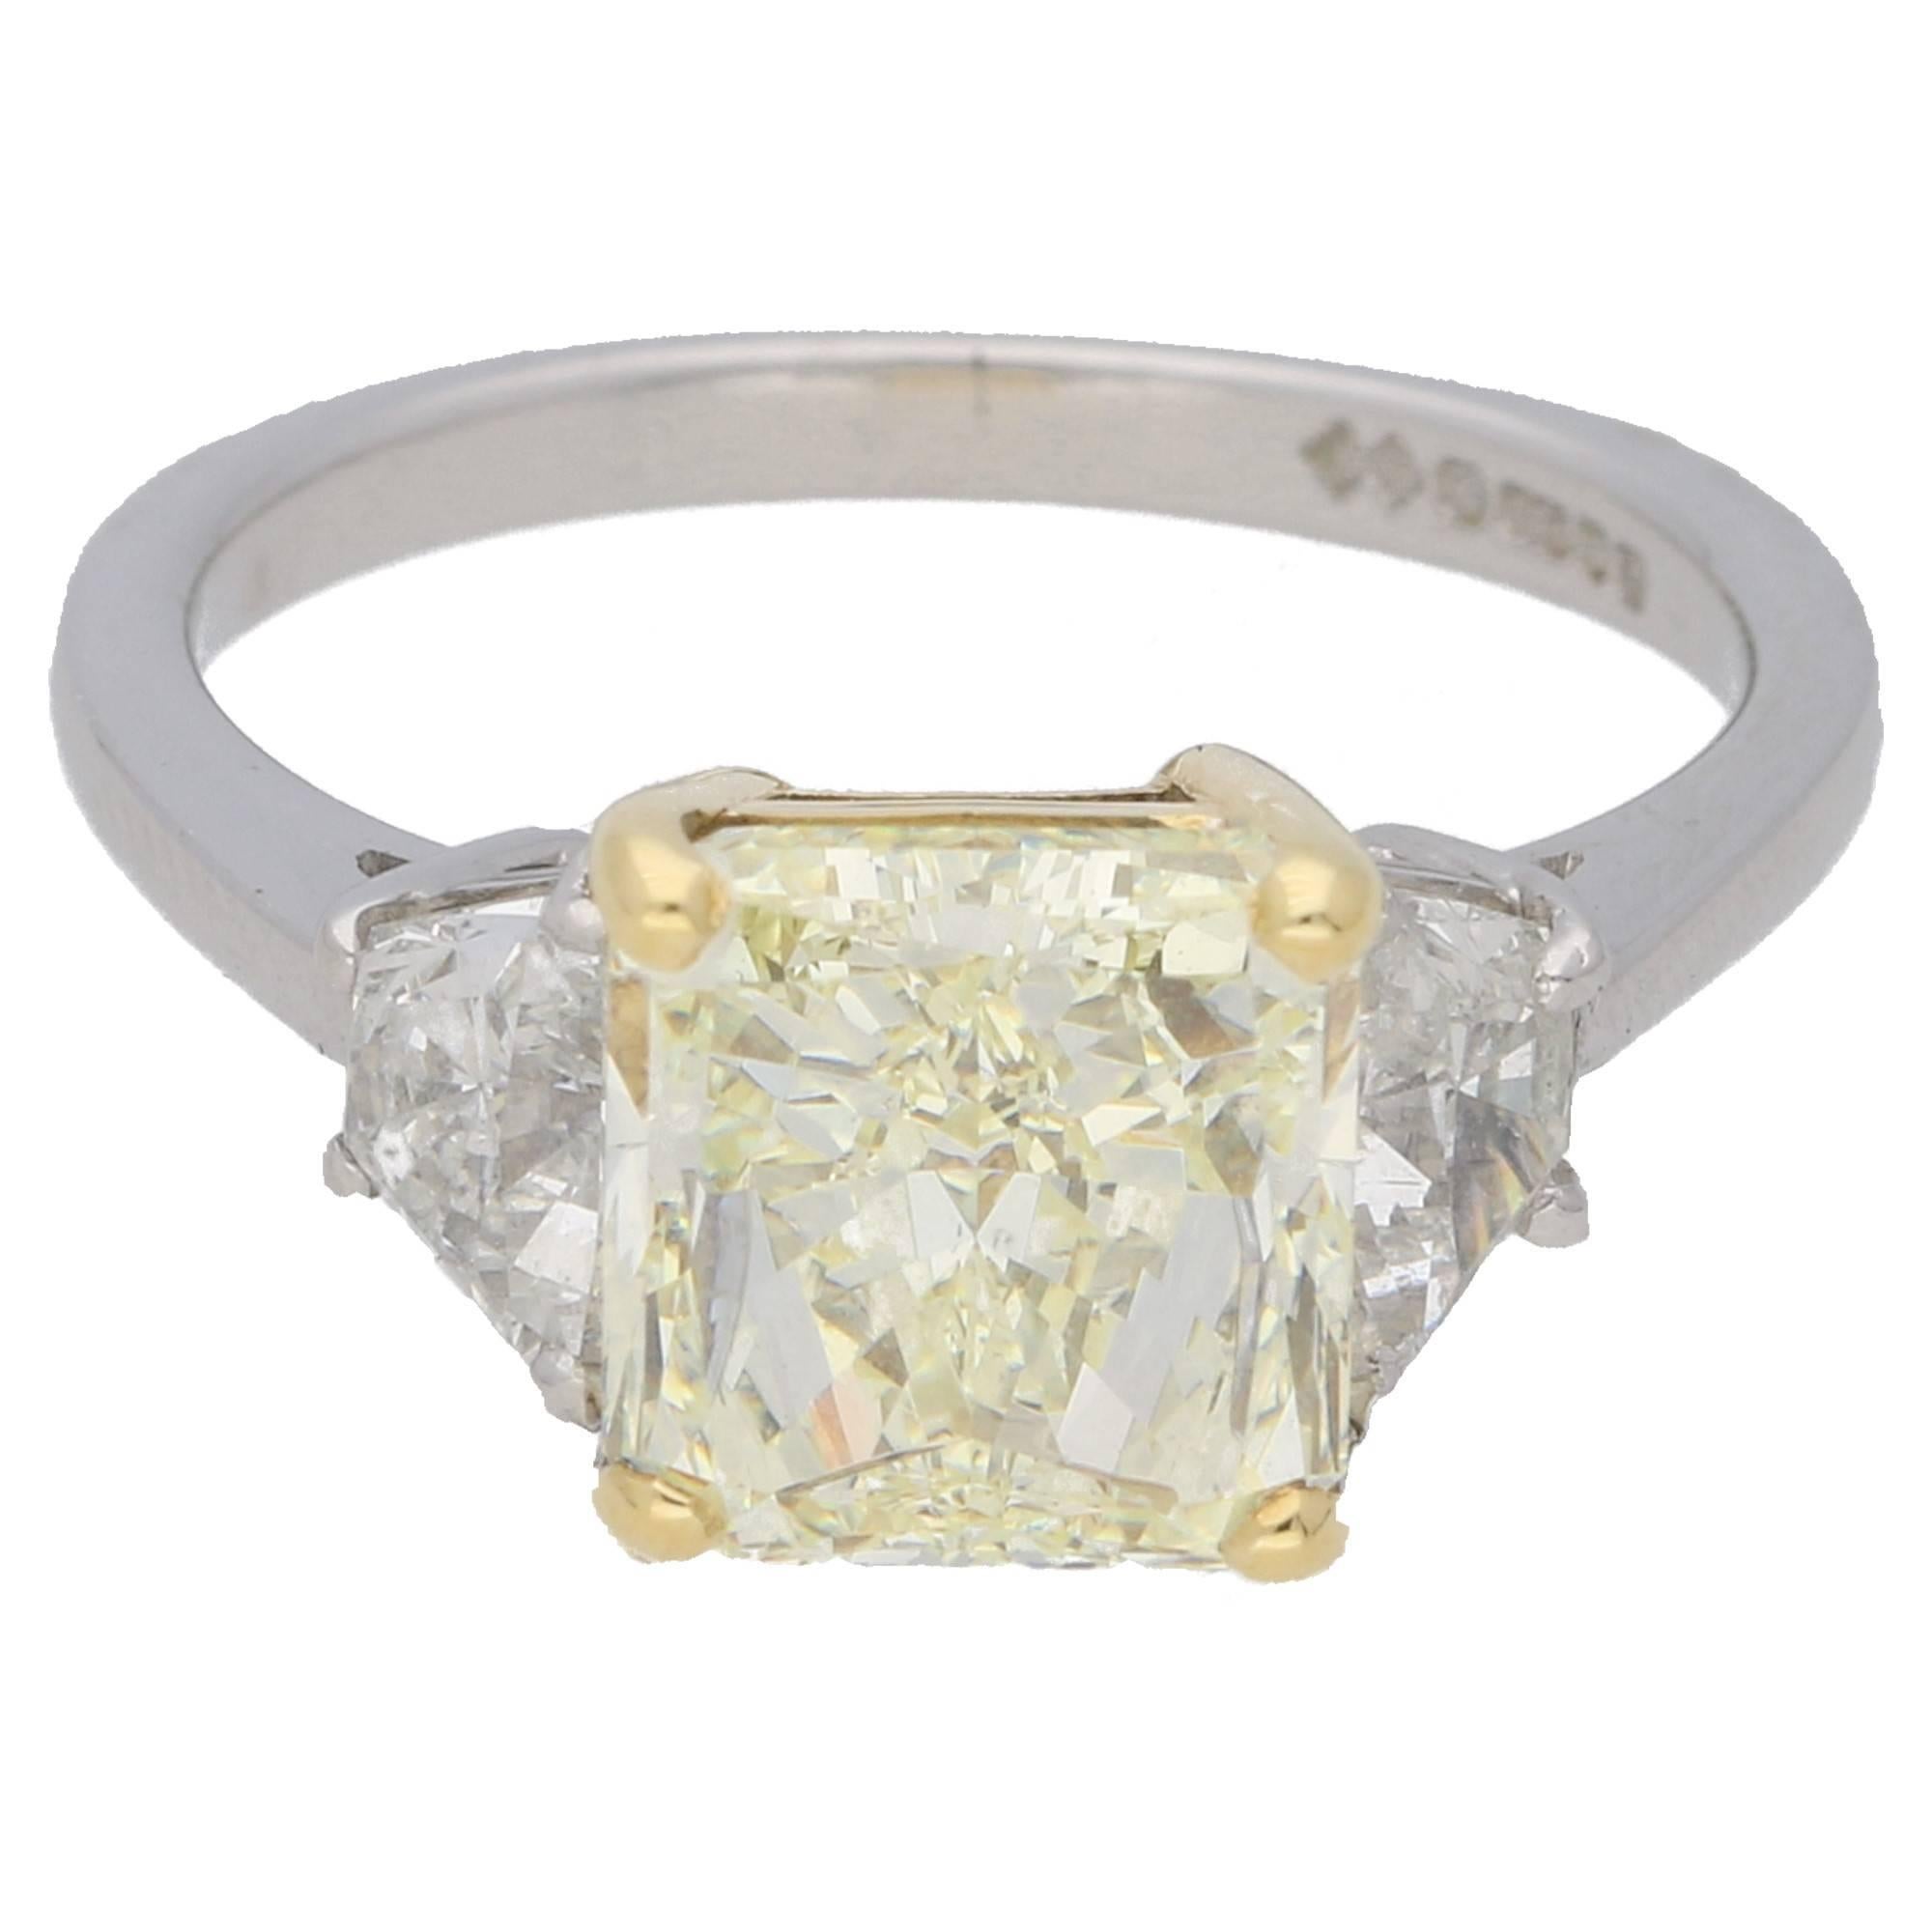 Certified Radiant Cut Yellow Diamond Engagement Ring in 18k Gold 